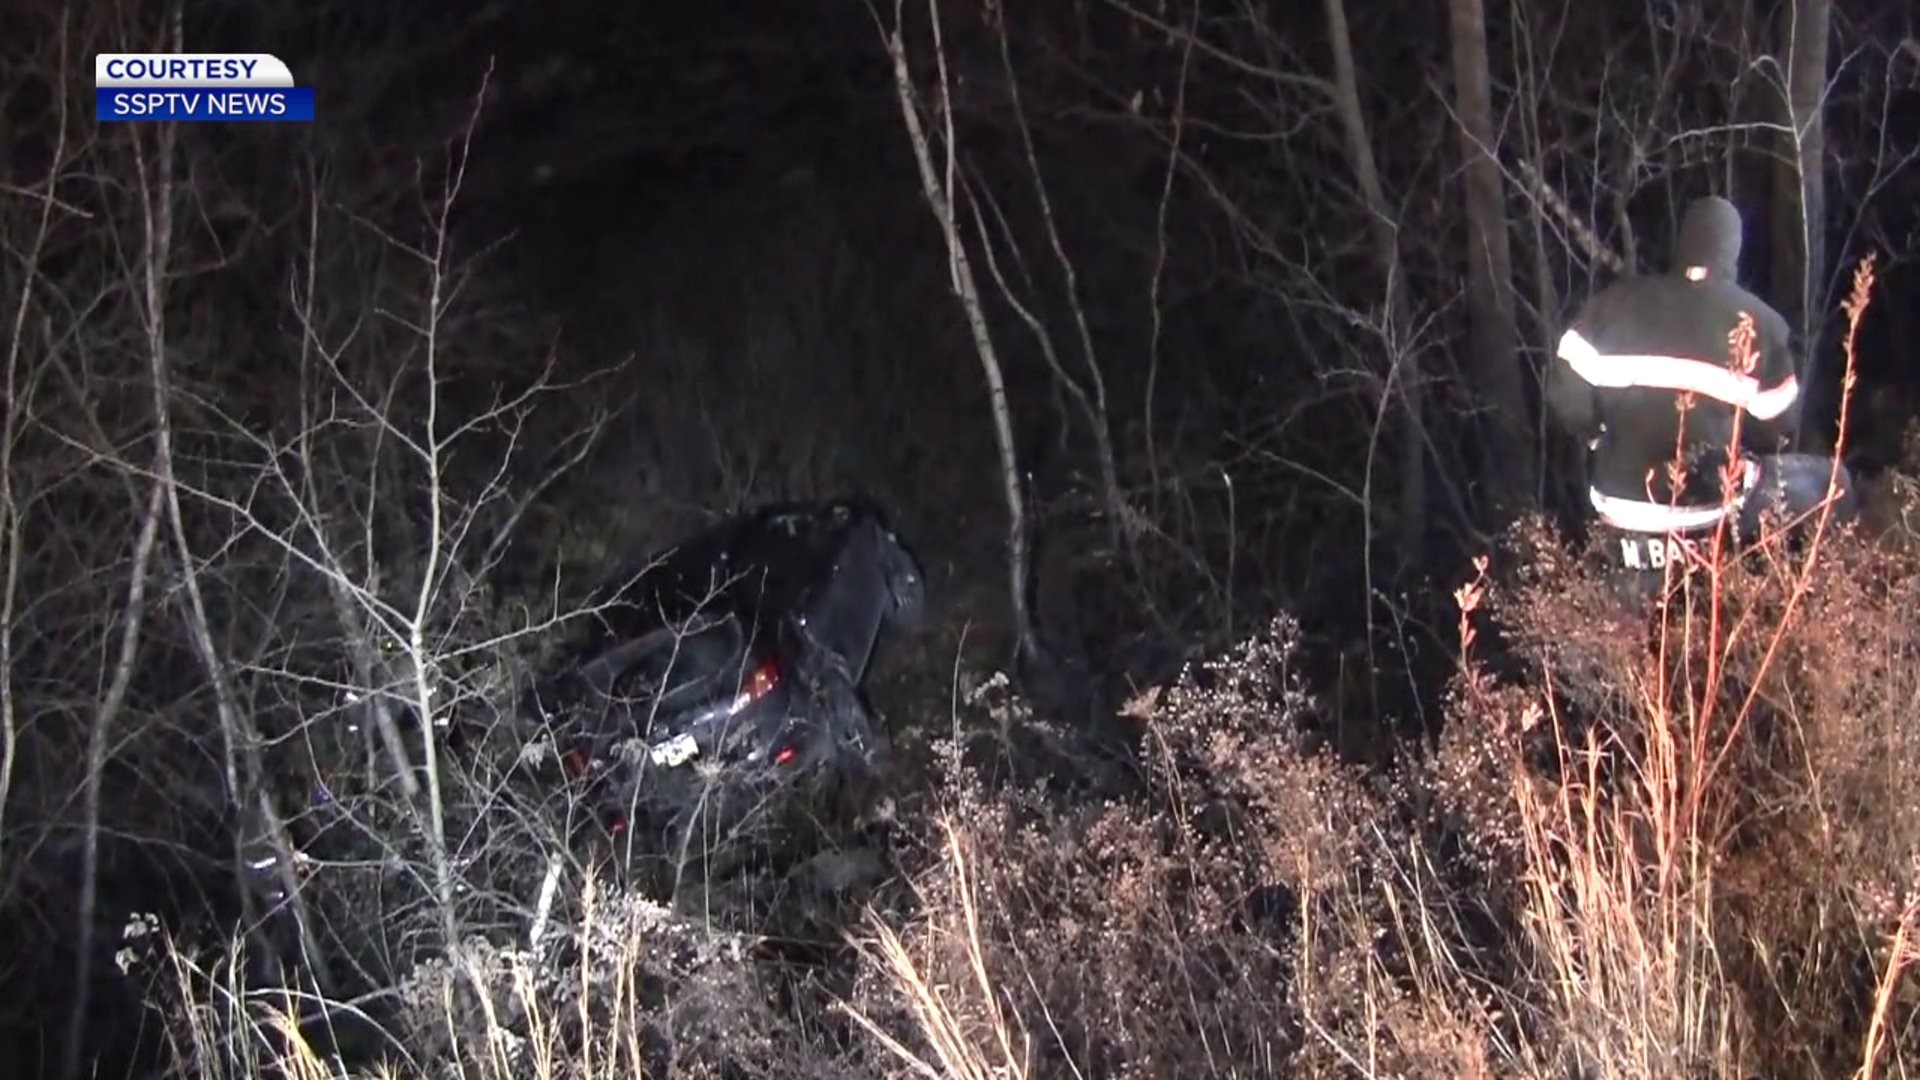 Woman Rescued from SUV After Crash in Schuylkill County